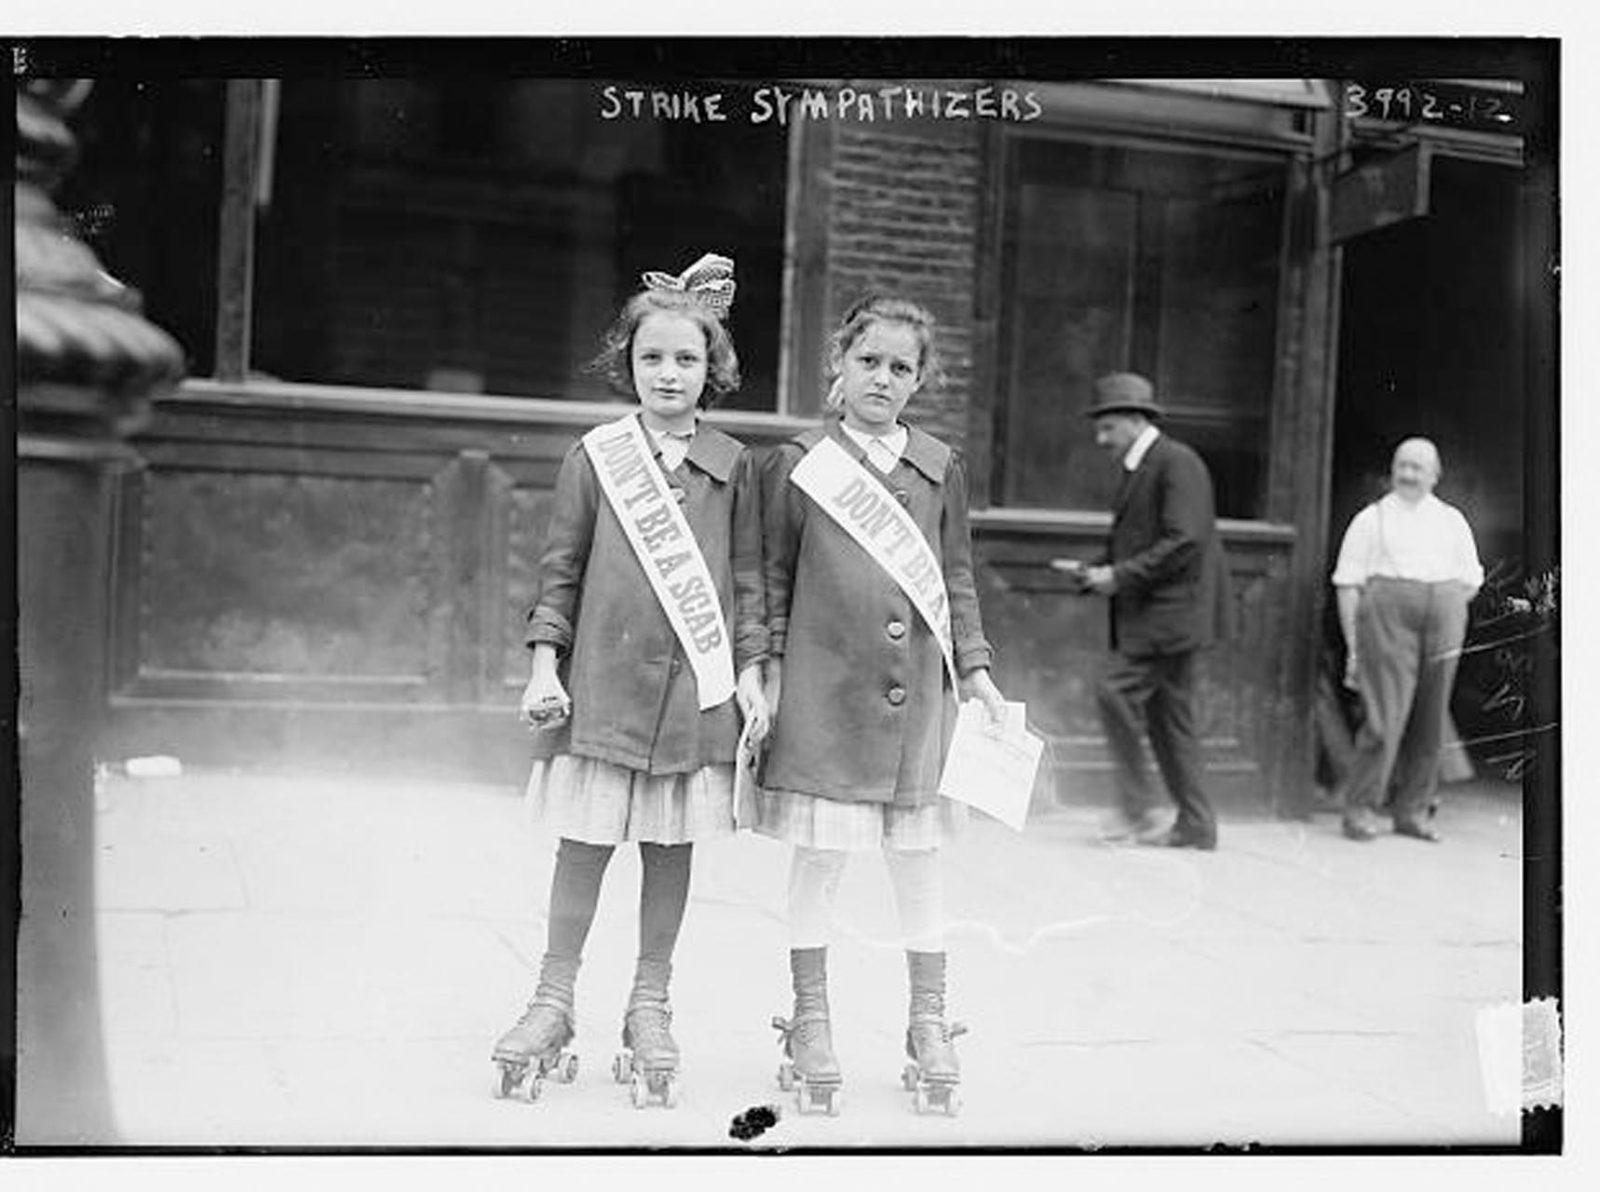 Two young girls side by side in roller skates and matching jackets and skirts wear strike sashes that say "Don't be a scab"